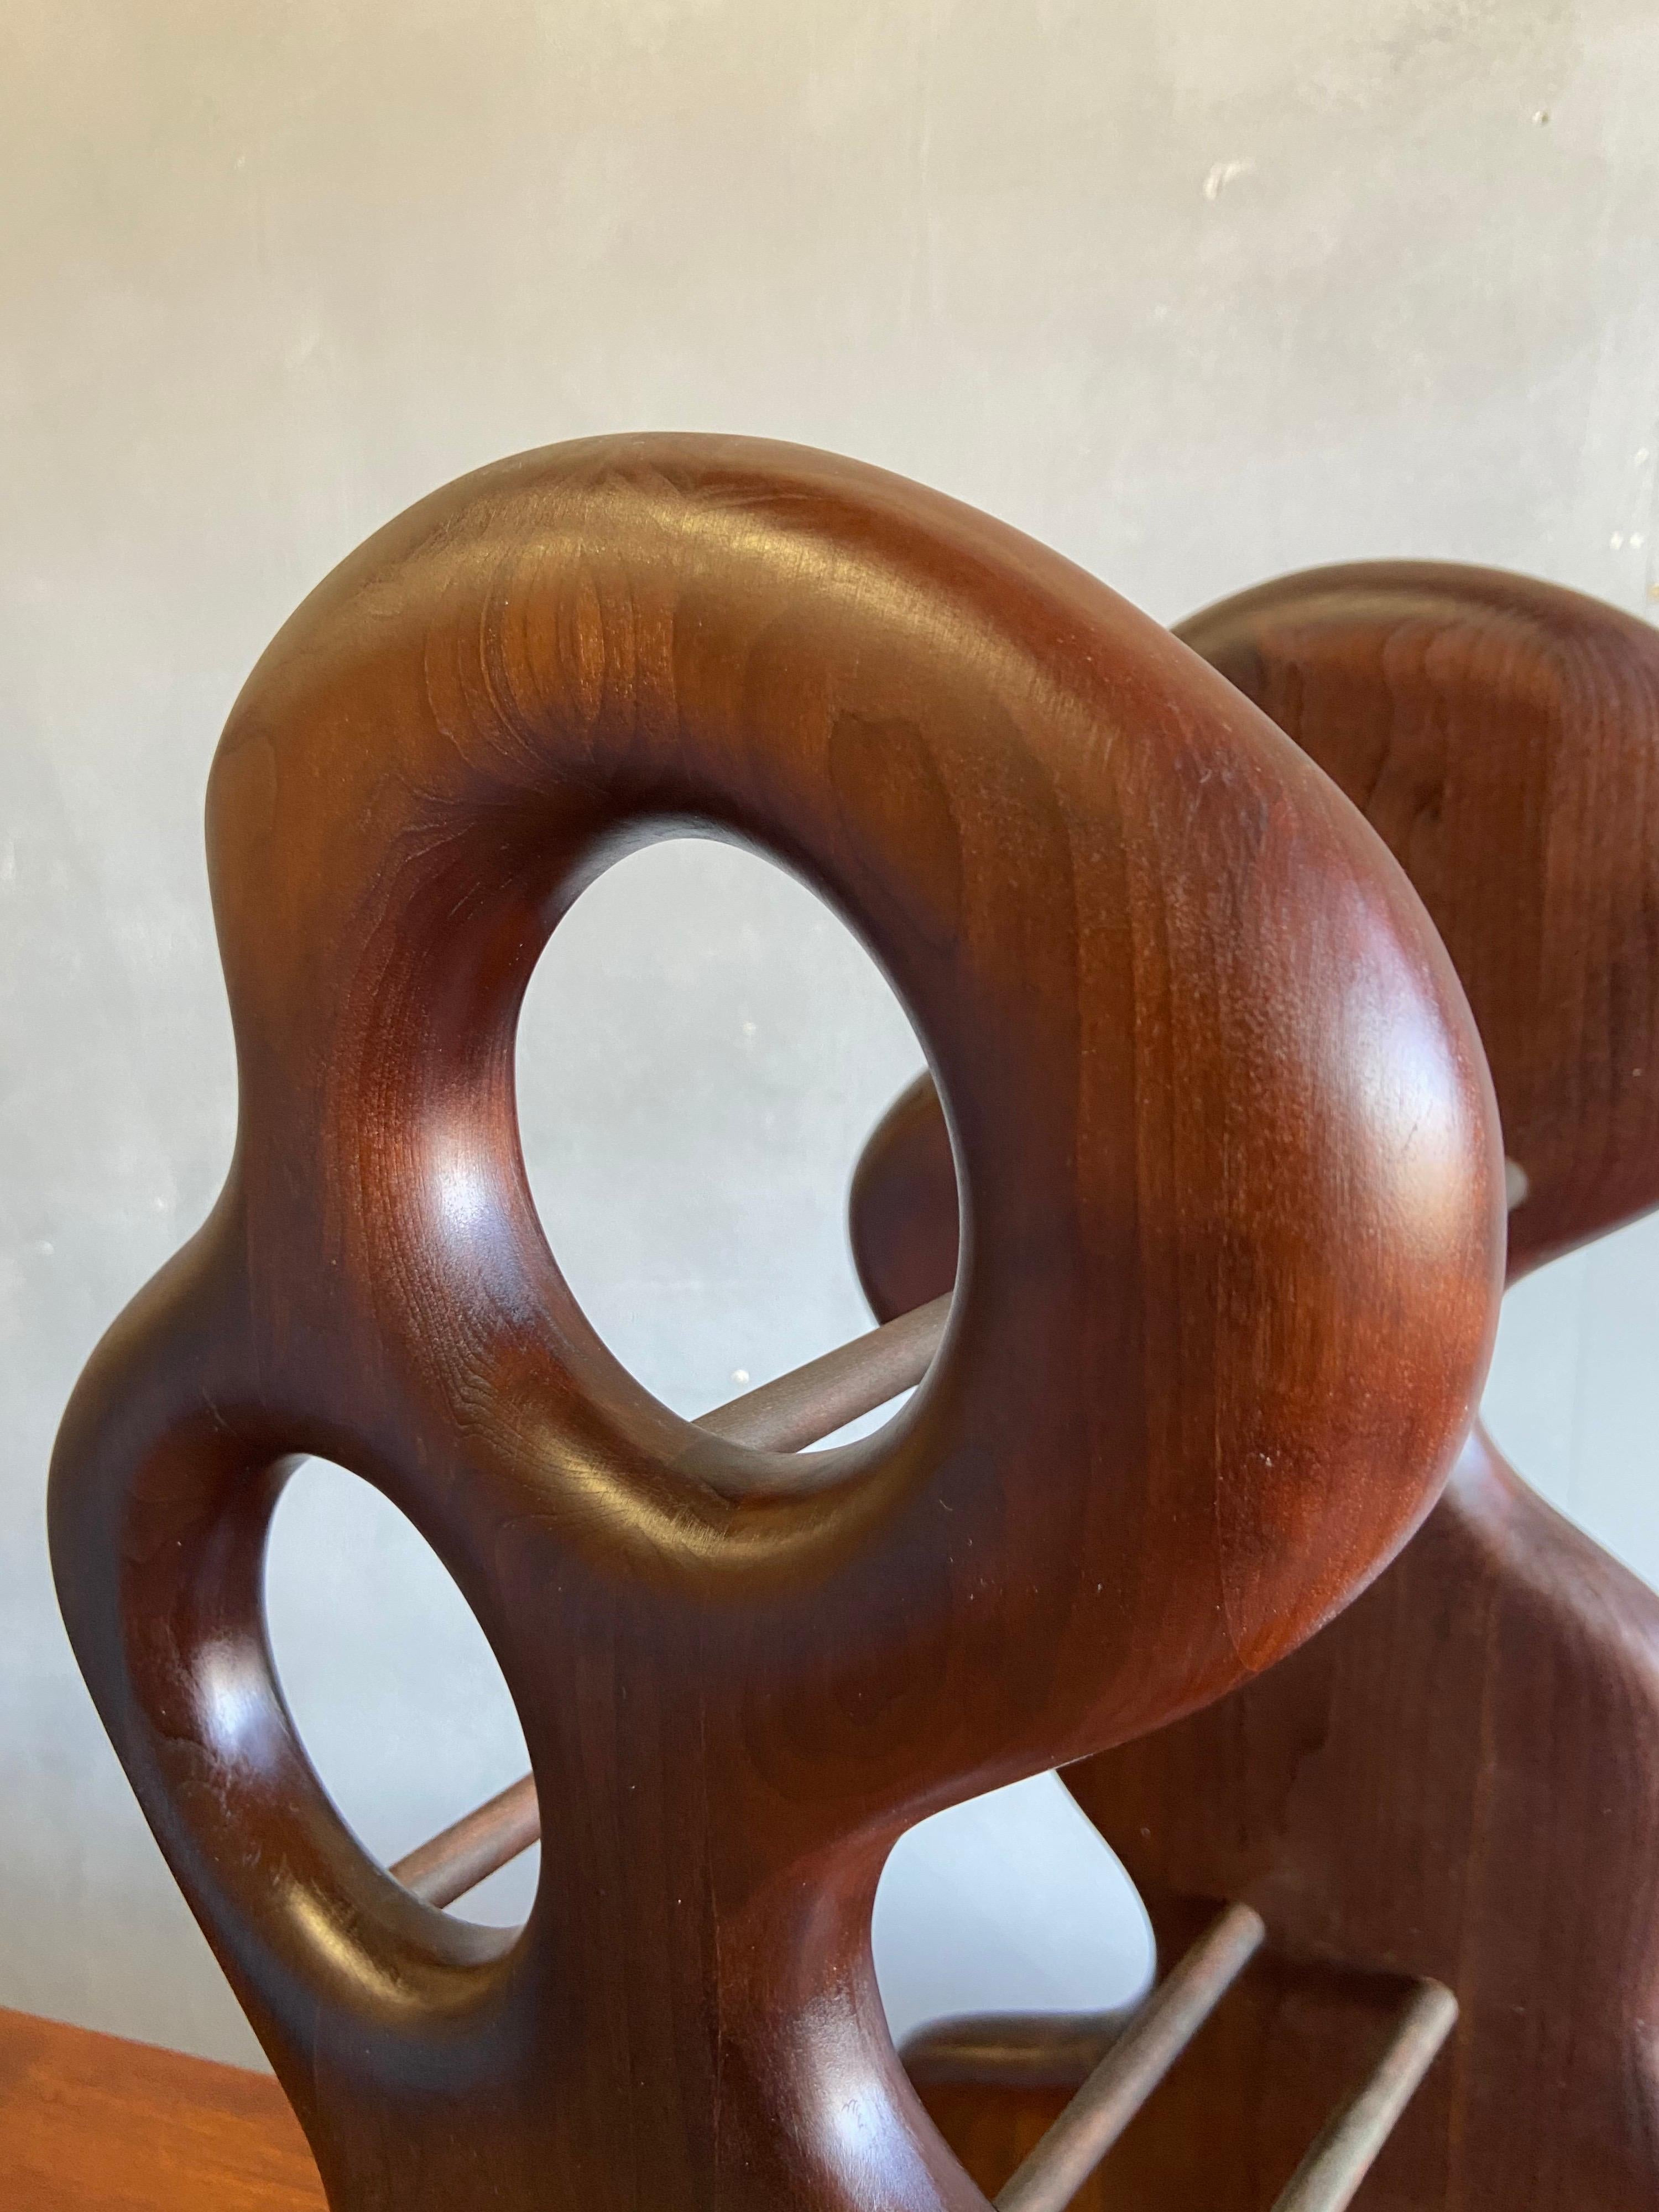 For your consideration is this beautifully sculpted wine holder by Master Craftsman Dean Santner. Santner designs are part of the American Studio Modern Craft movement along side Wendell Castle, Nakashima, Phillip Powell to name a few. This hand